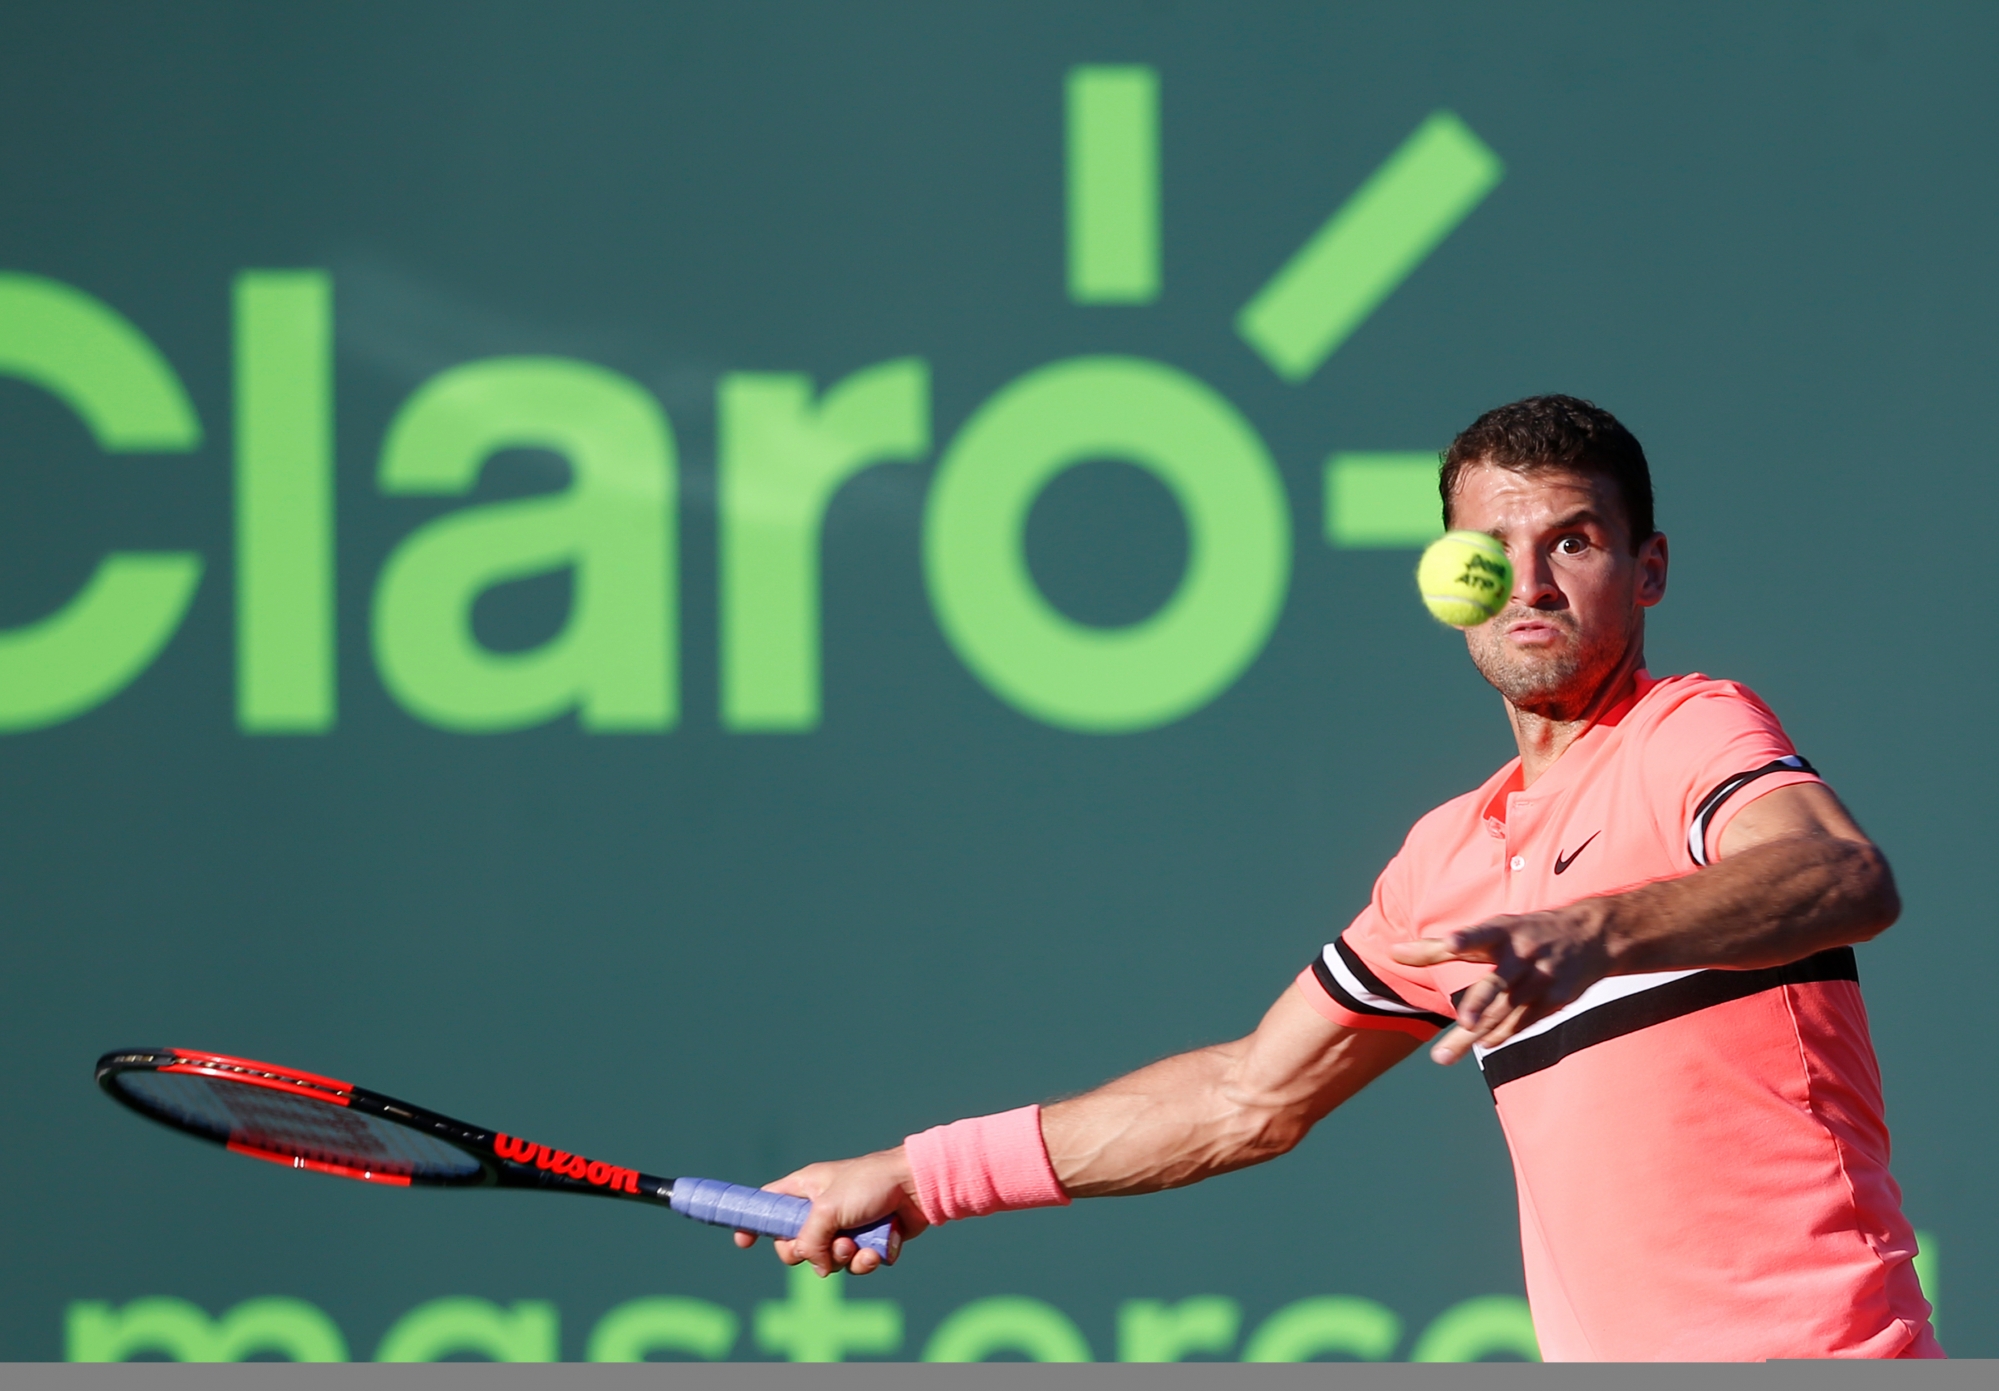 Grigor Dimitrov, of Bulgaria, returns a shot from Jeremy Chardy, of France, during a tennis match at the Miami Open, Sunday, March 25, 2018, in Key Biscayne, Fla. Chardy defeated Dimitrov 6-4, 6-4. (AP Photo/Wilfredo Lee) Miami Open Tennis